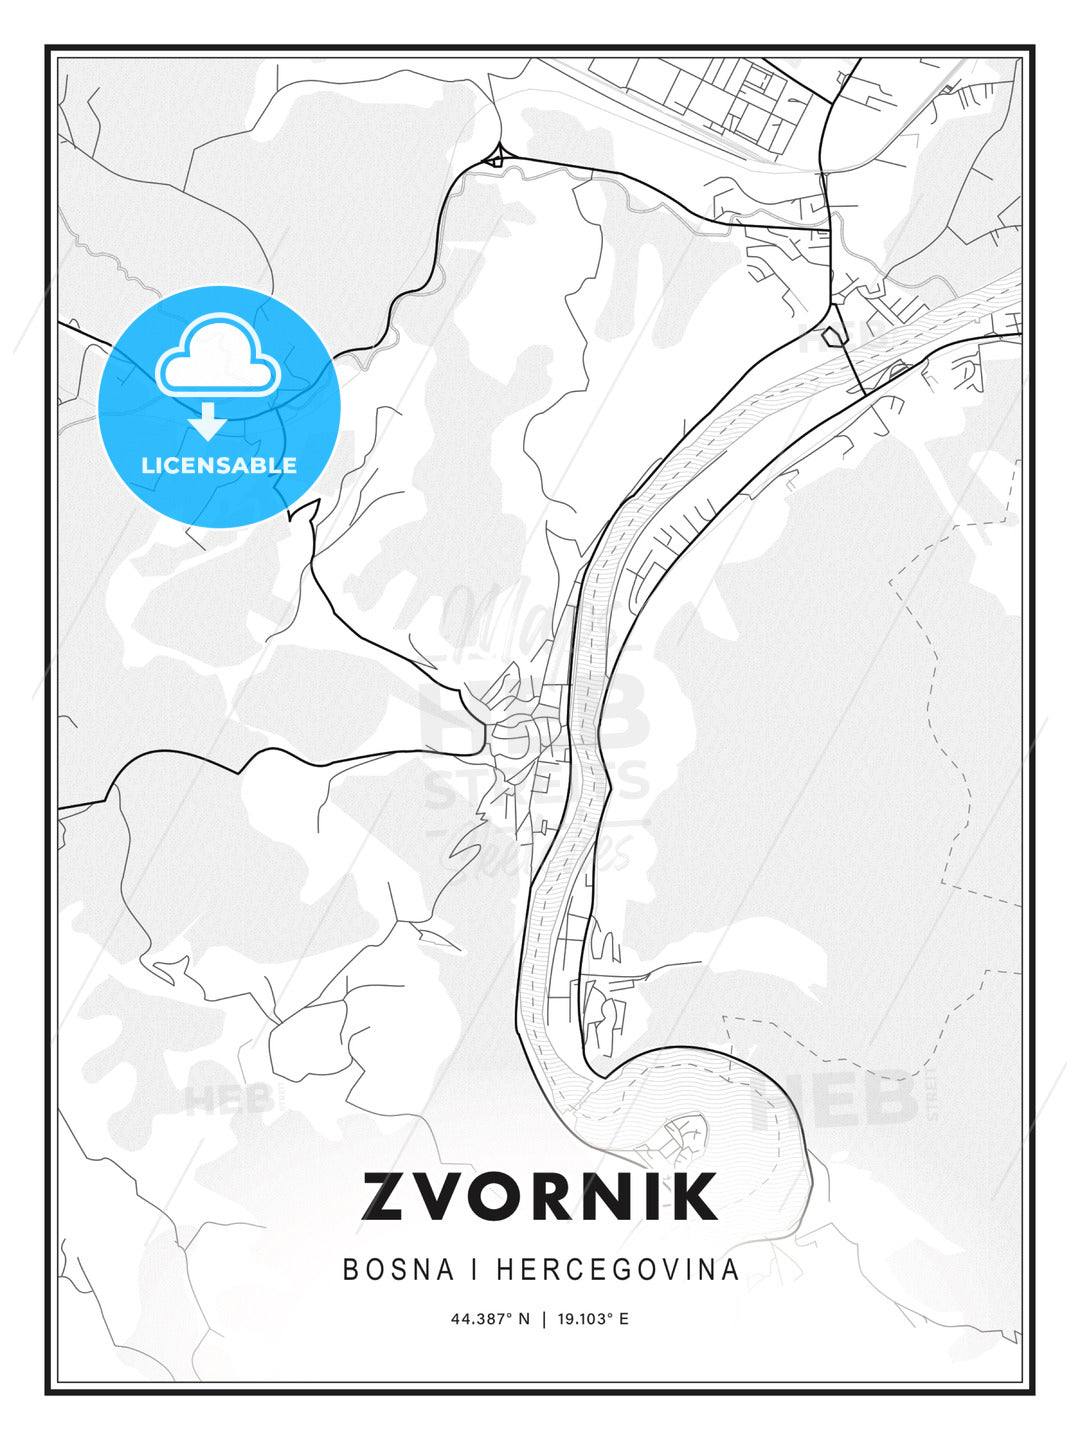 Zvornik, Bosnia and Herzegovina, Modern Print Template in Various Formats - HEBSTREITS Sketches